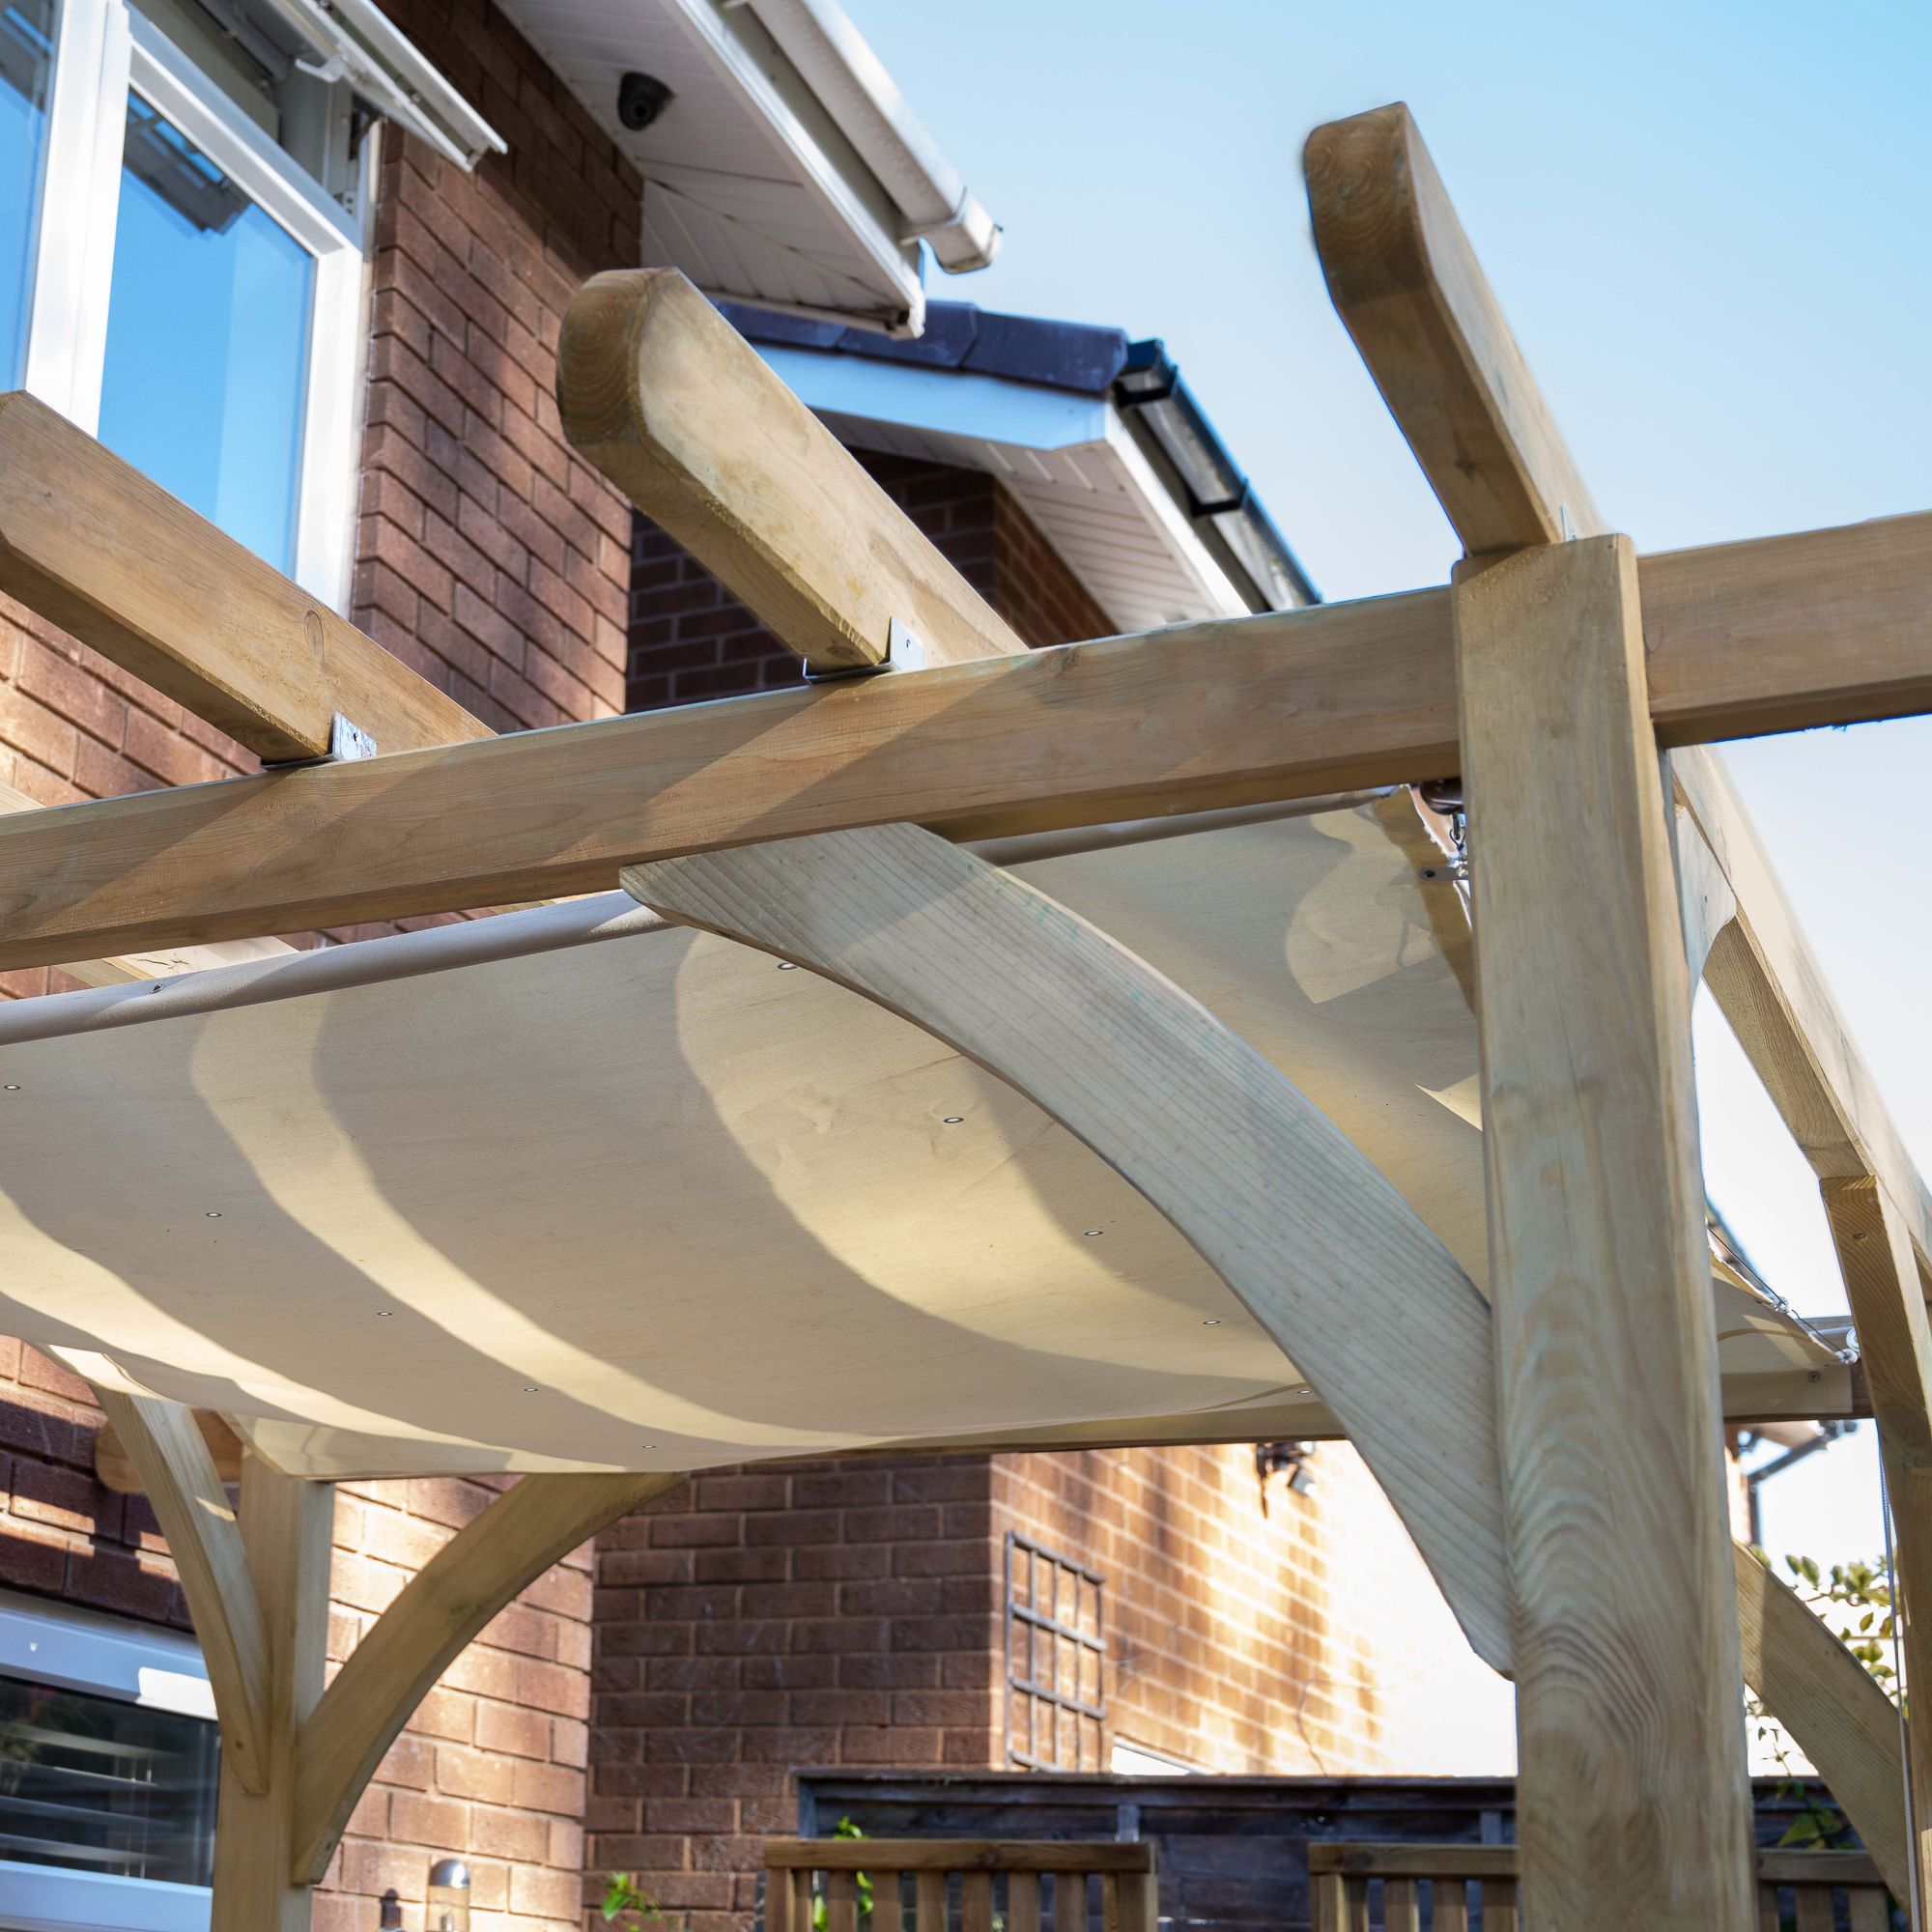 Forest Garden Ultima Cream Square Pergola & decking kit, x4 Post (H) 2.4m x (W) 2.4m - Canopy included